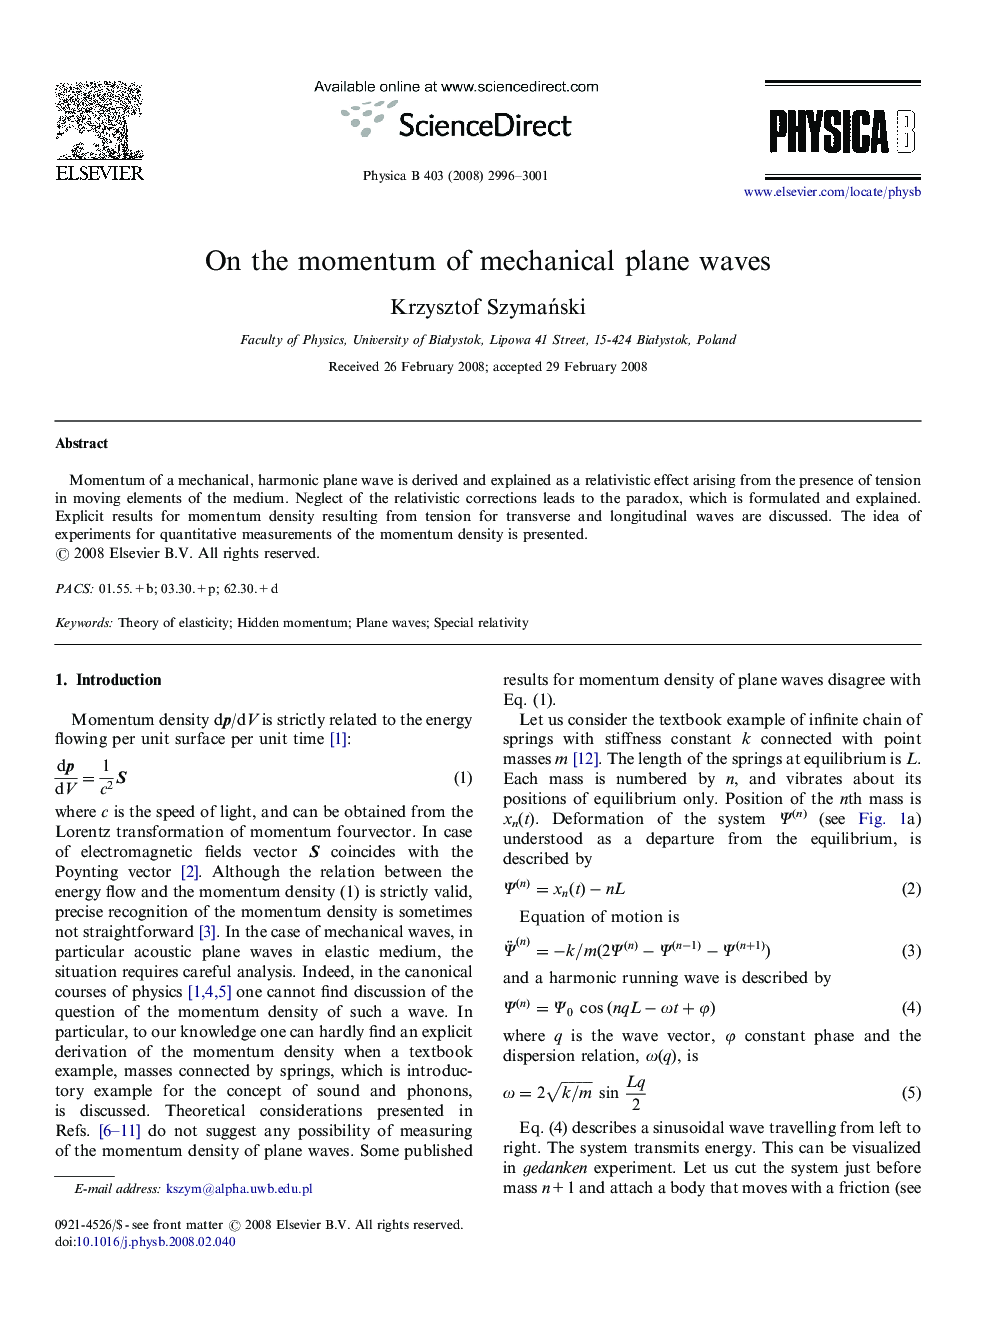 On the momentum of mechanical plane waves